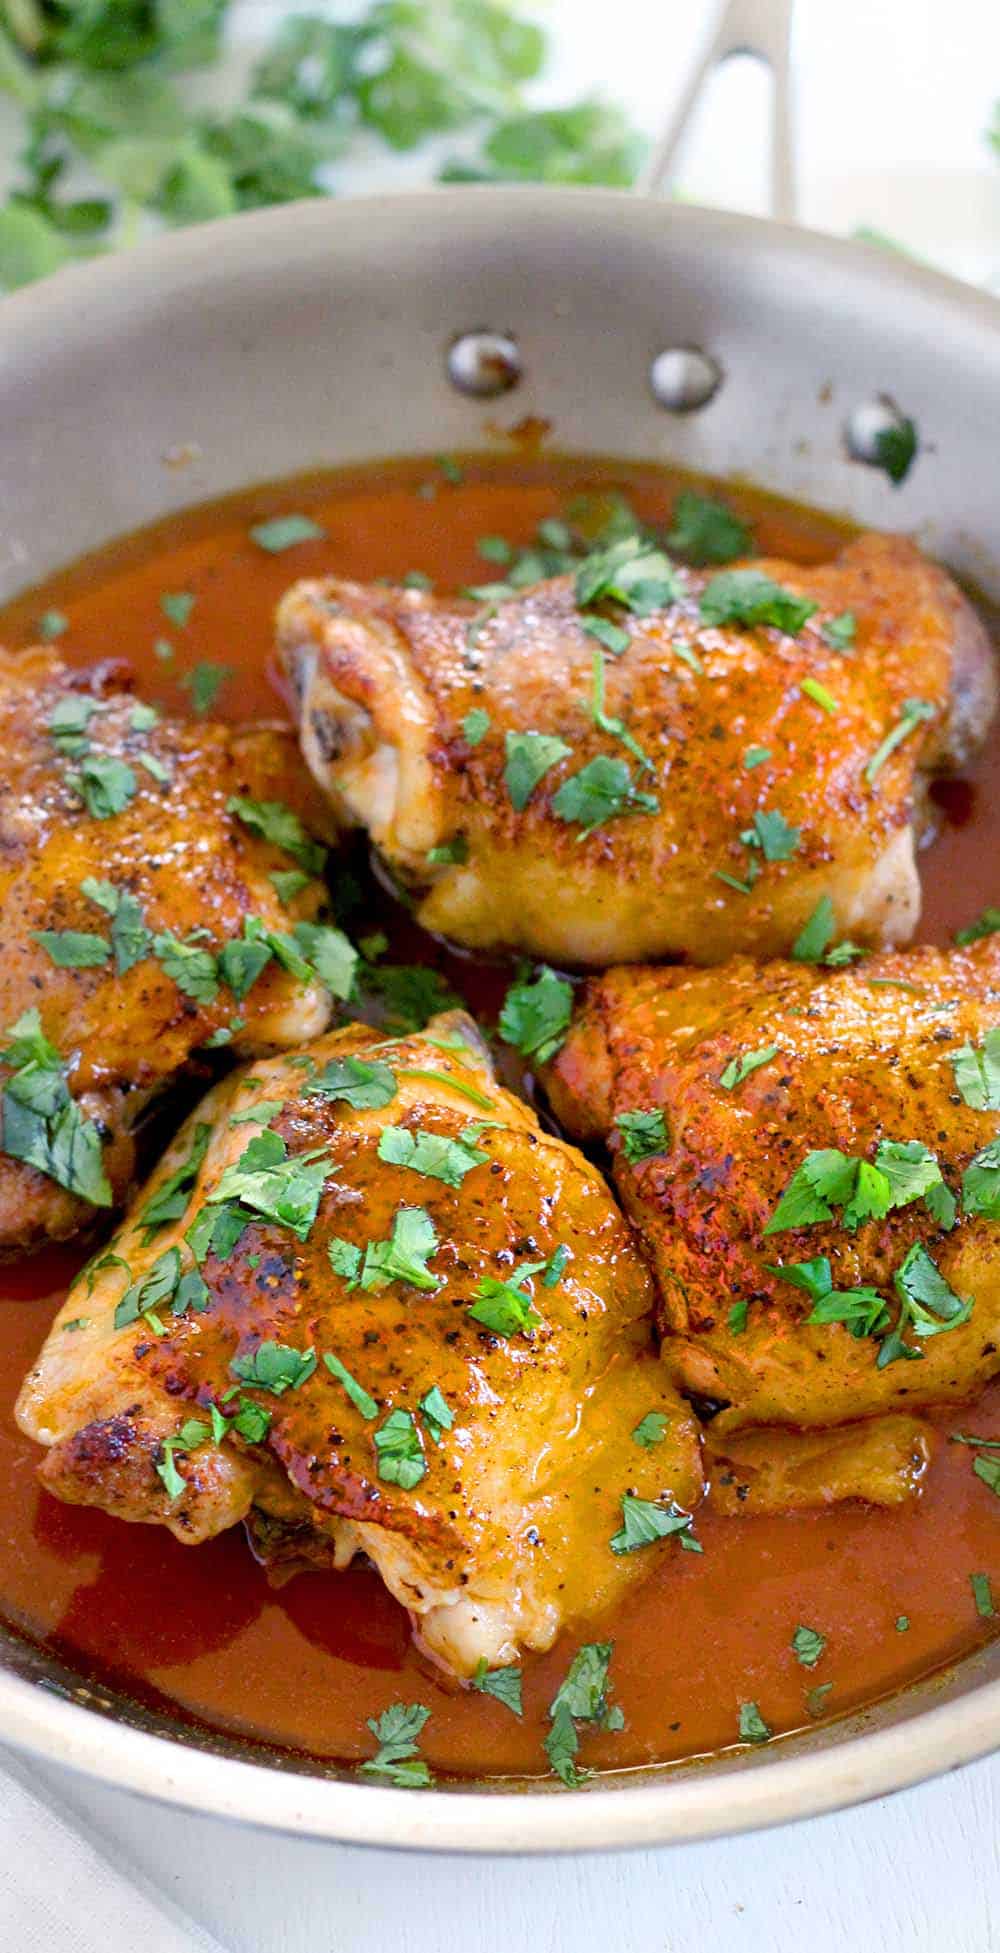 This sweet and spicy recipe for honey buffalo chicken thighs features crispy skin and only five ingredients. Make this low-carb, budget-friendly, gluten-free meal next time you are craving buffalo flavor!